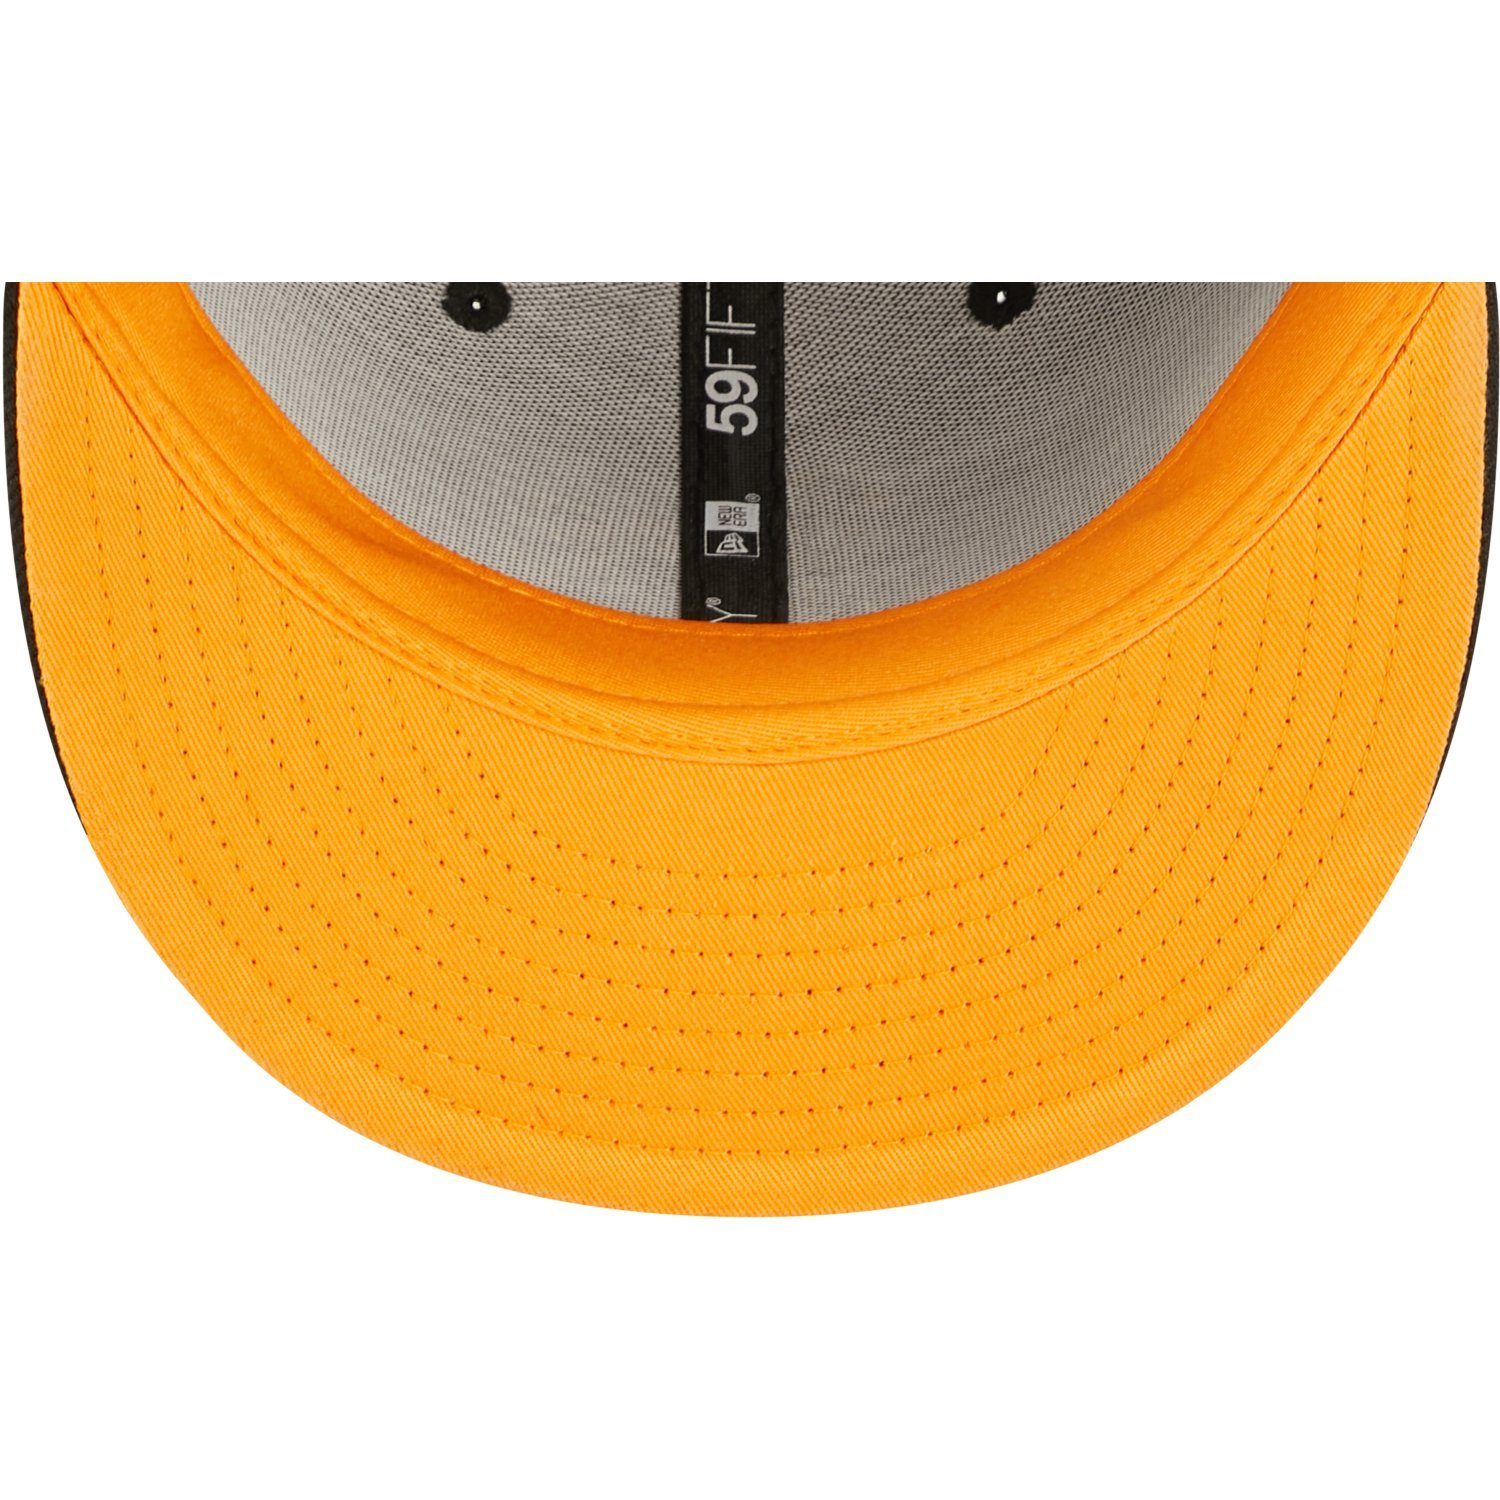 Fitted Era TIGERFILL Oakland New Athletics Cap 59Fifty